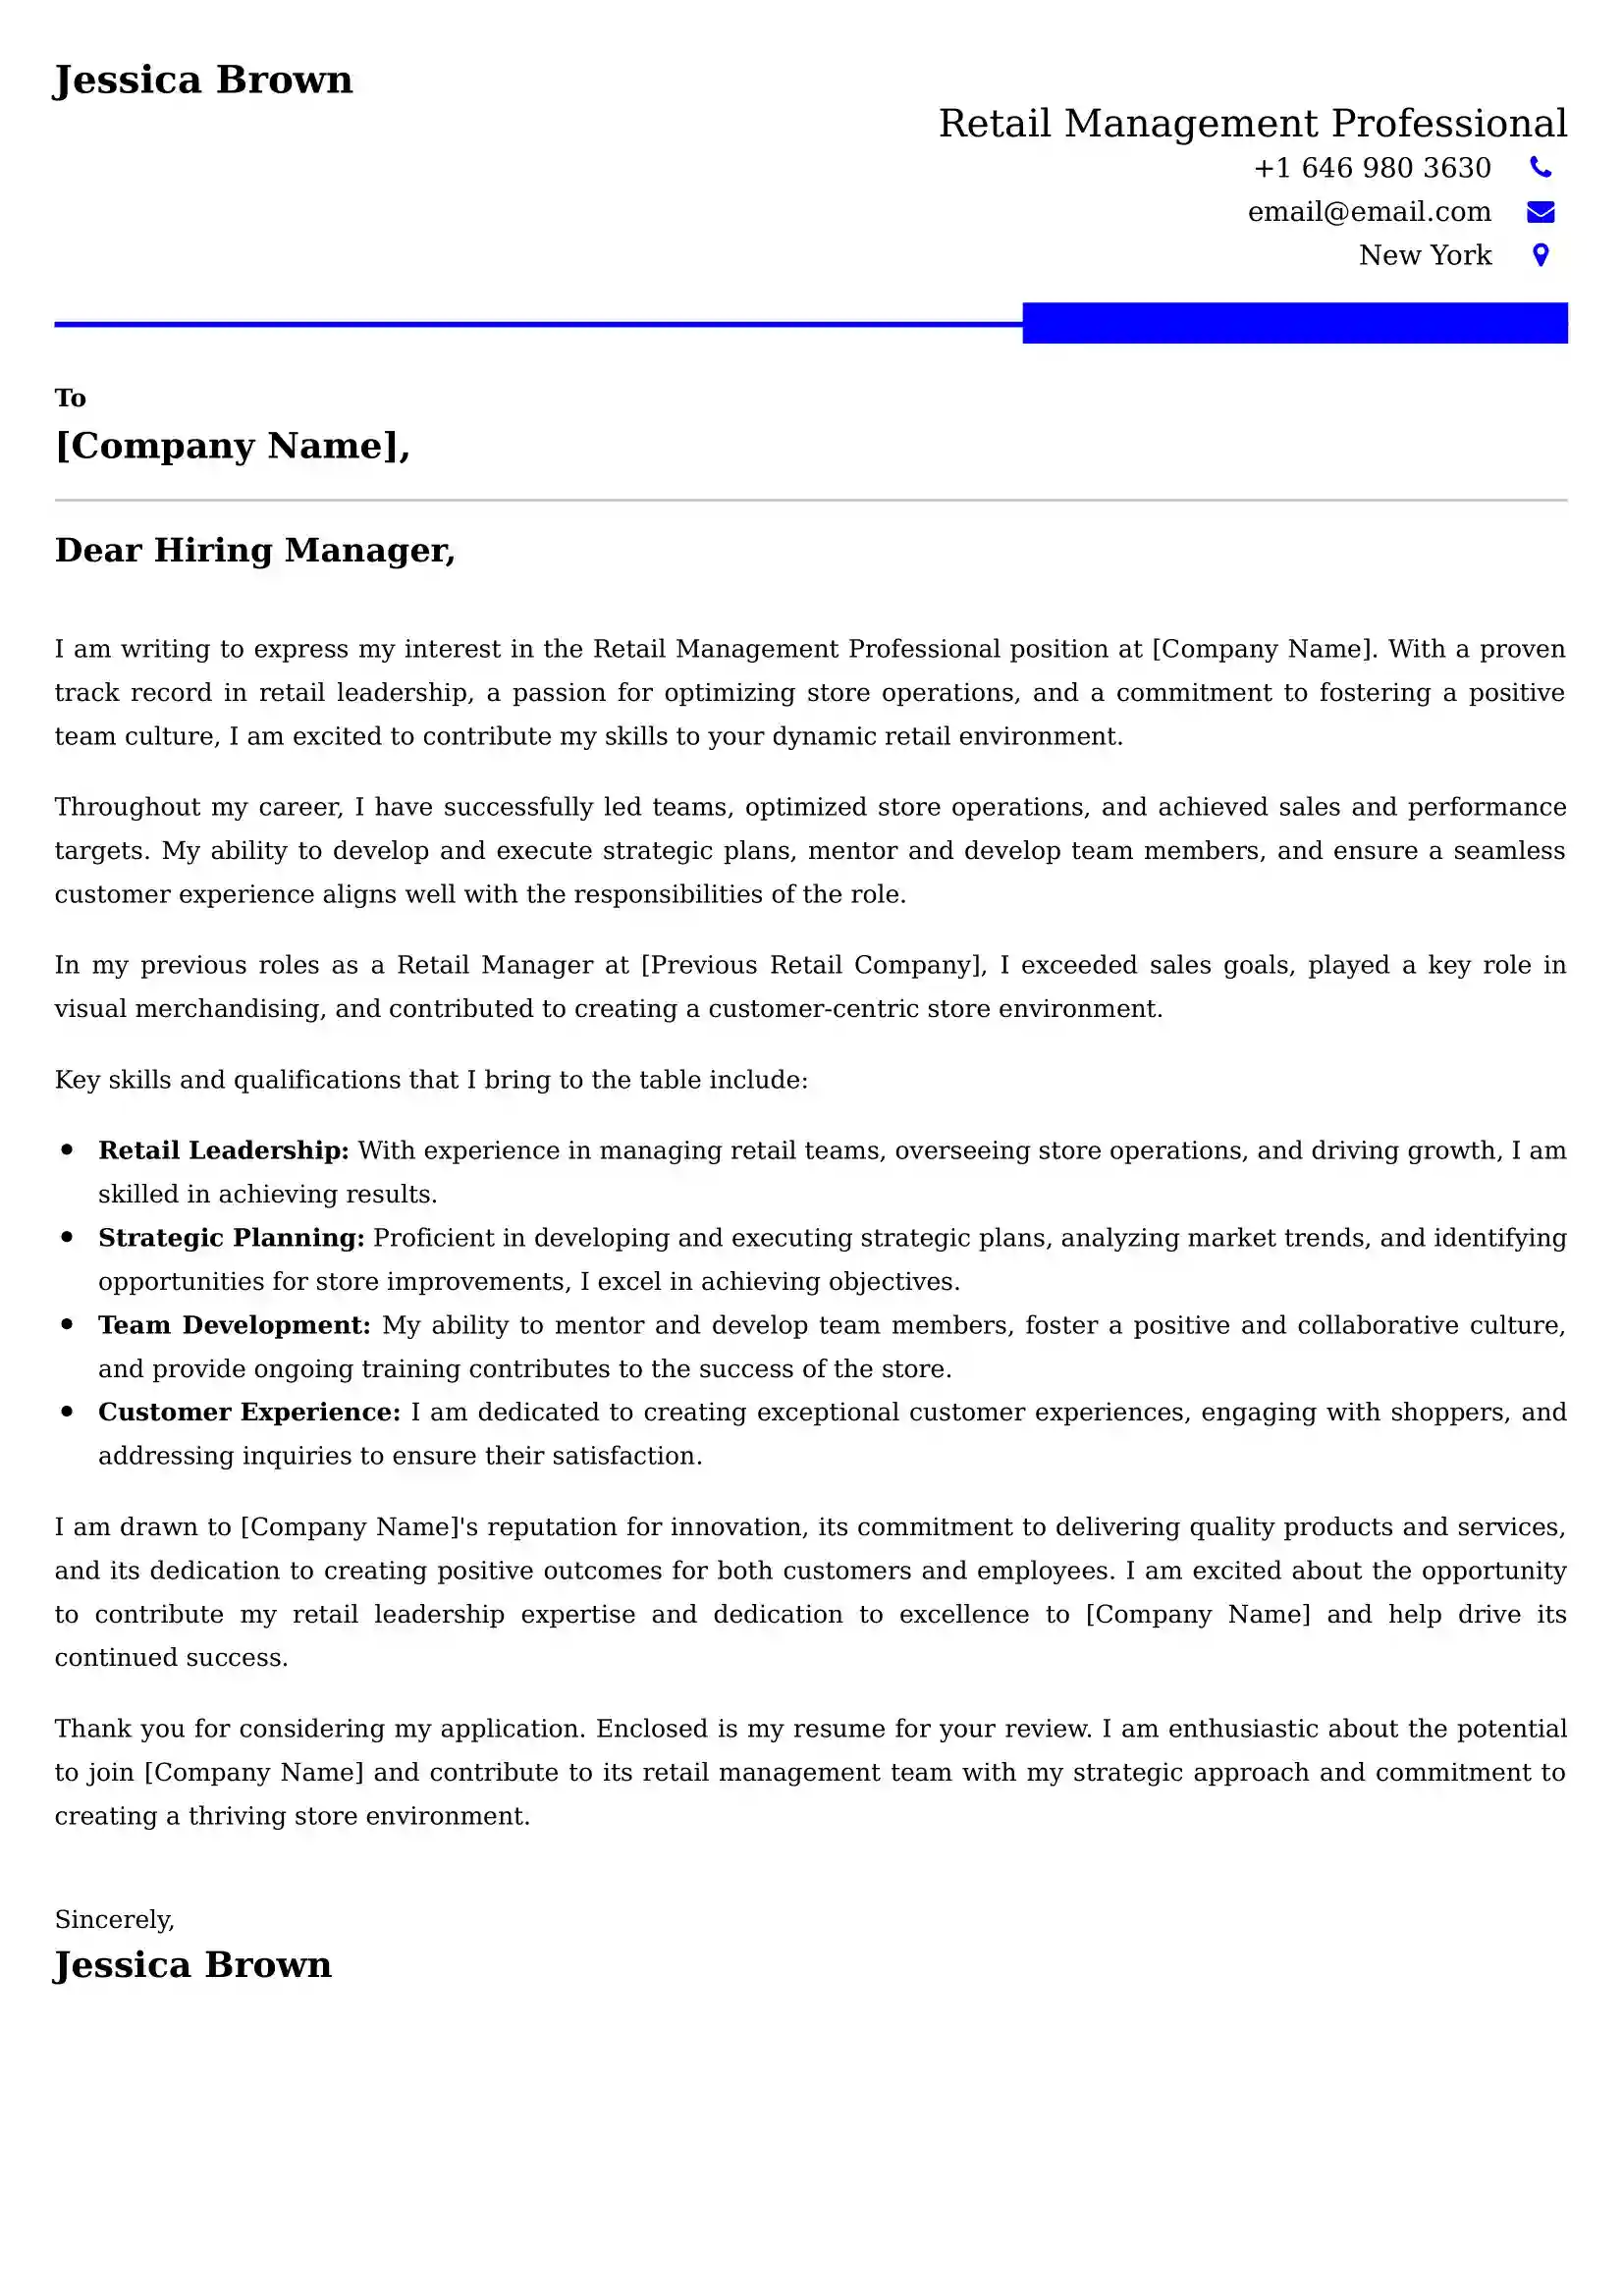 Retail Management Professional Cover Letter Examples - Latest UK Format